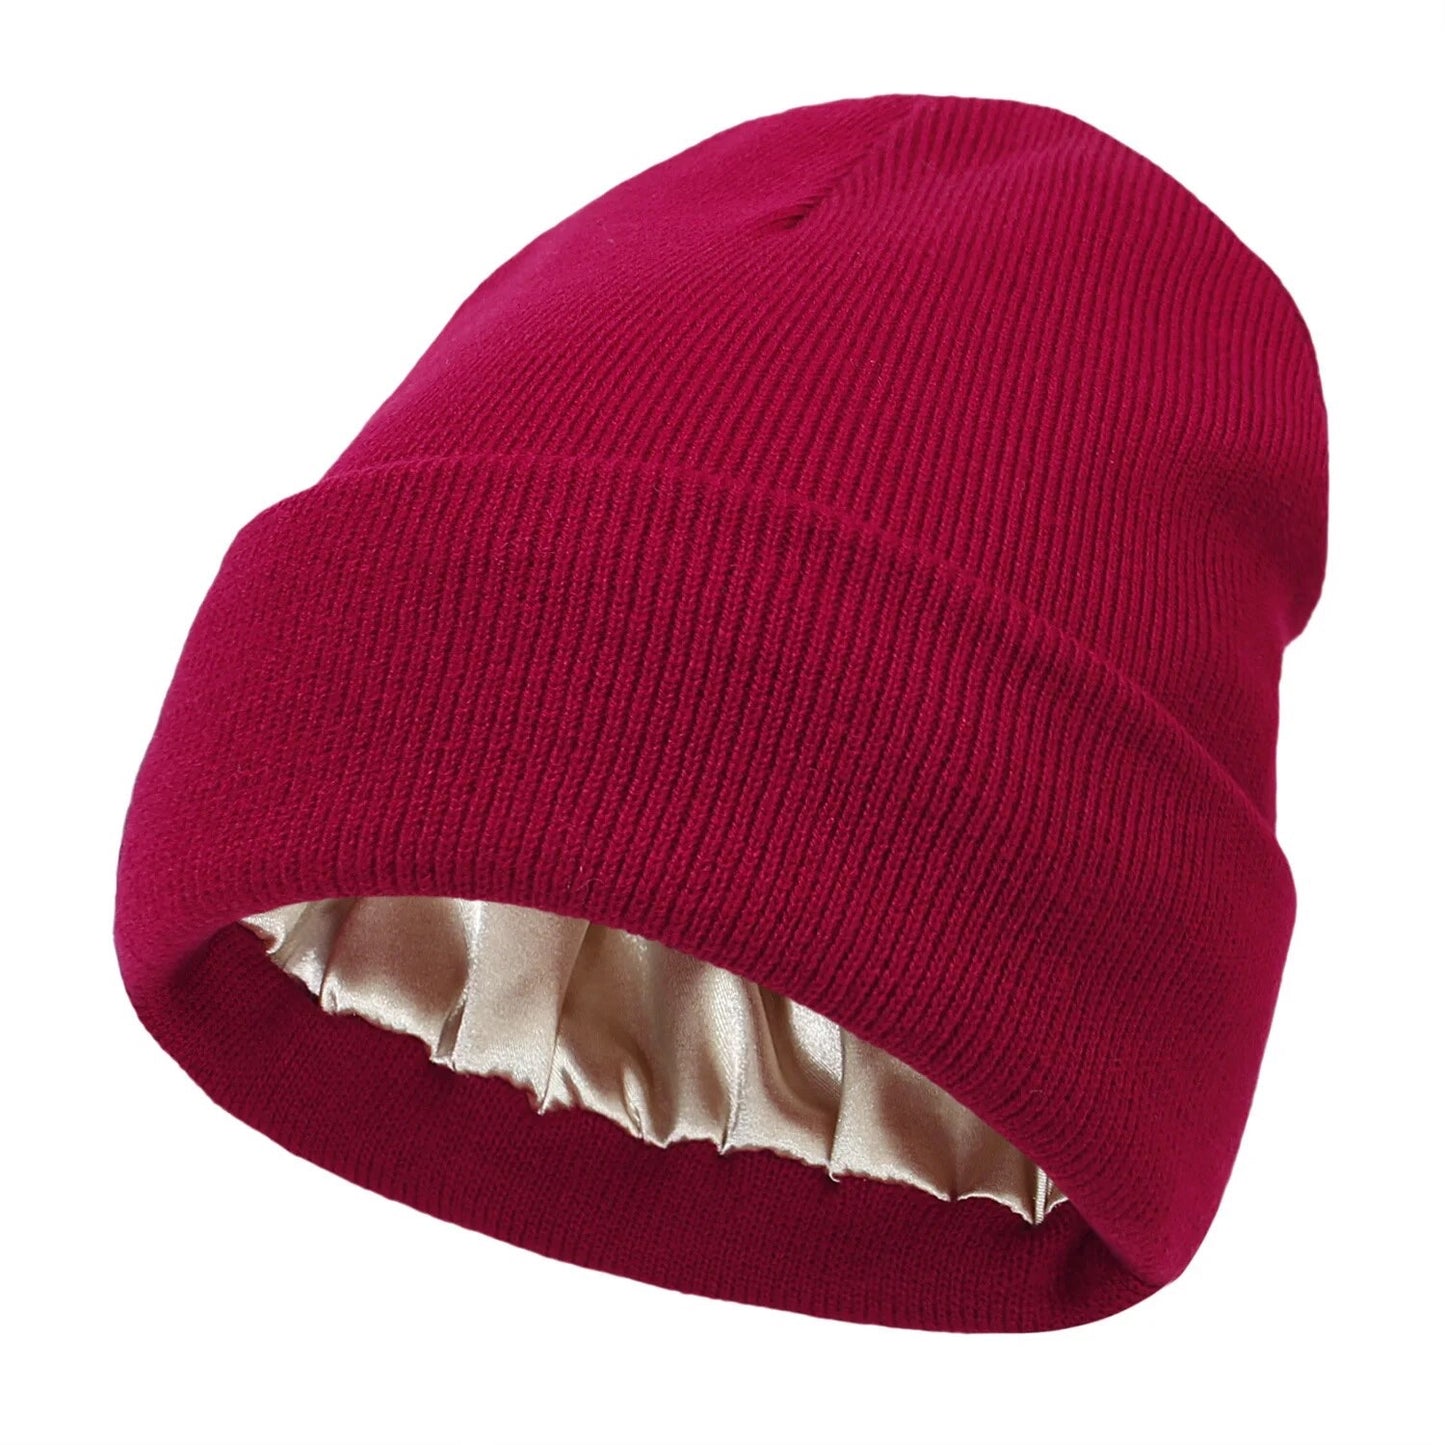 Red Satin Lined Beanie Winter Hat